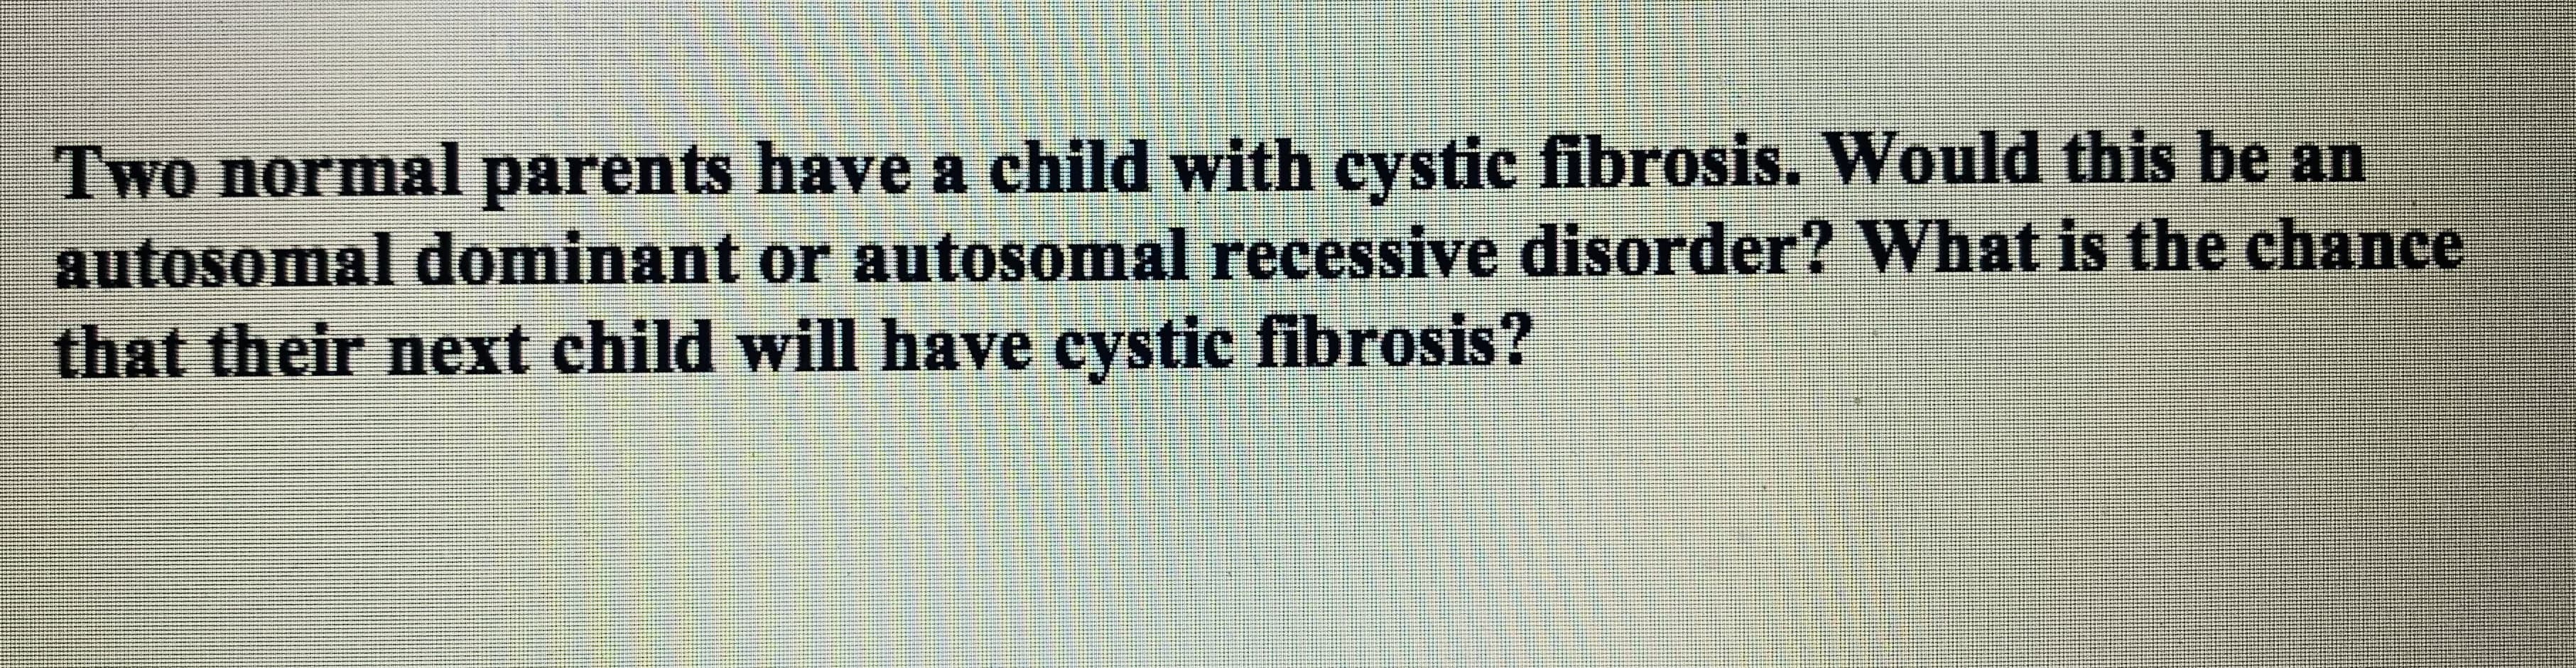 Two normal parents have a child with cystic fibrosis. Would this be an
autosomal dominant or autosomal recessive disorder? What is the chance
that their next child will have cystic fibrosis?
